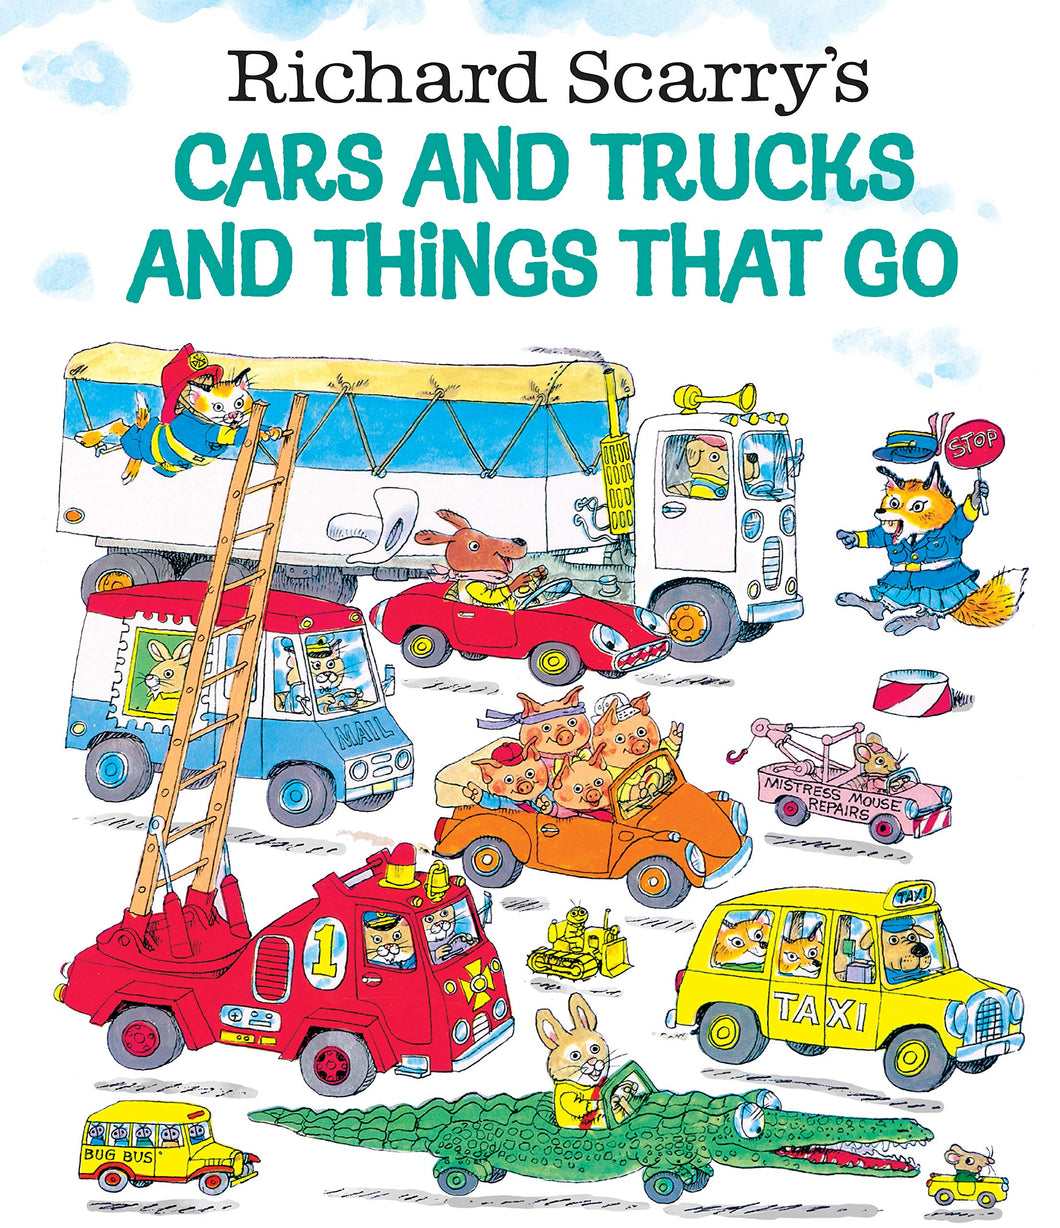 Richard Scarry's Cars and Trucks and Things that Go Hardcover